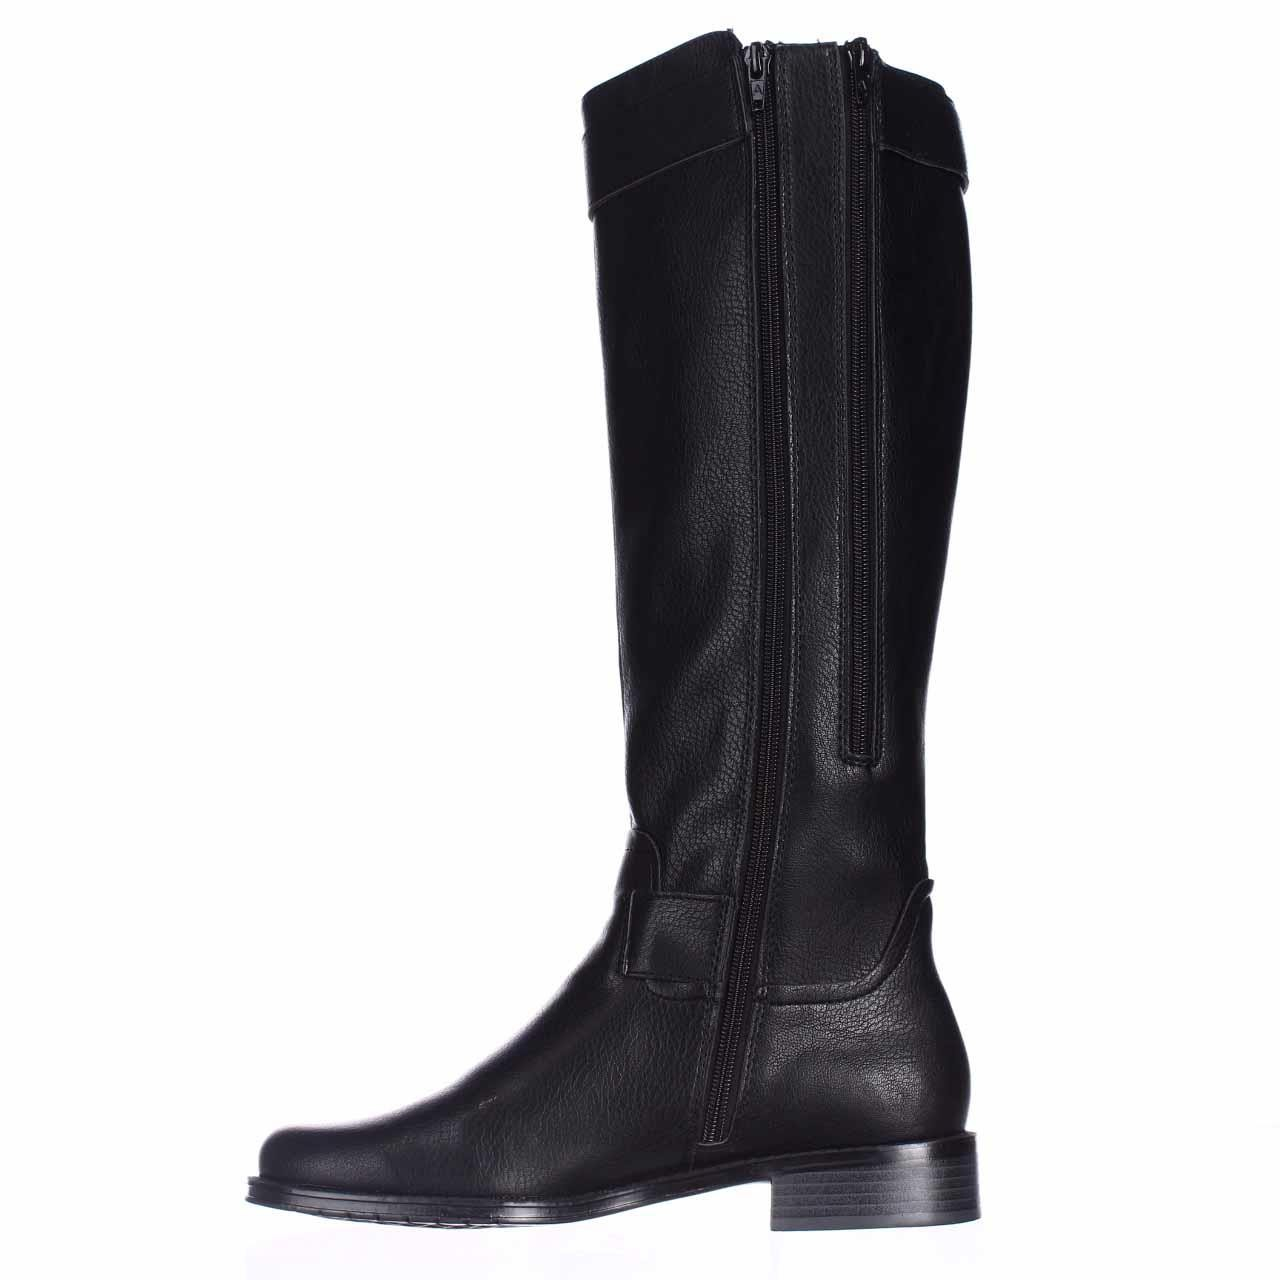 Lyst - Aerosoles Ride Around Expandable Calf Ridging Boots in Black